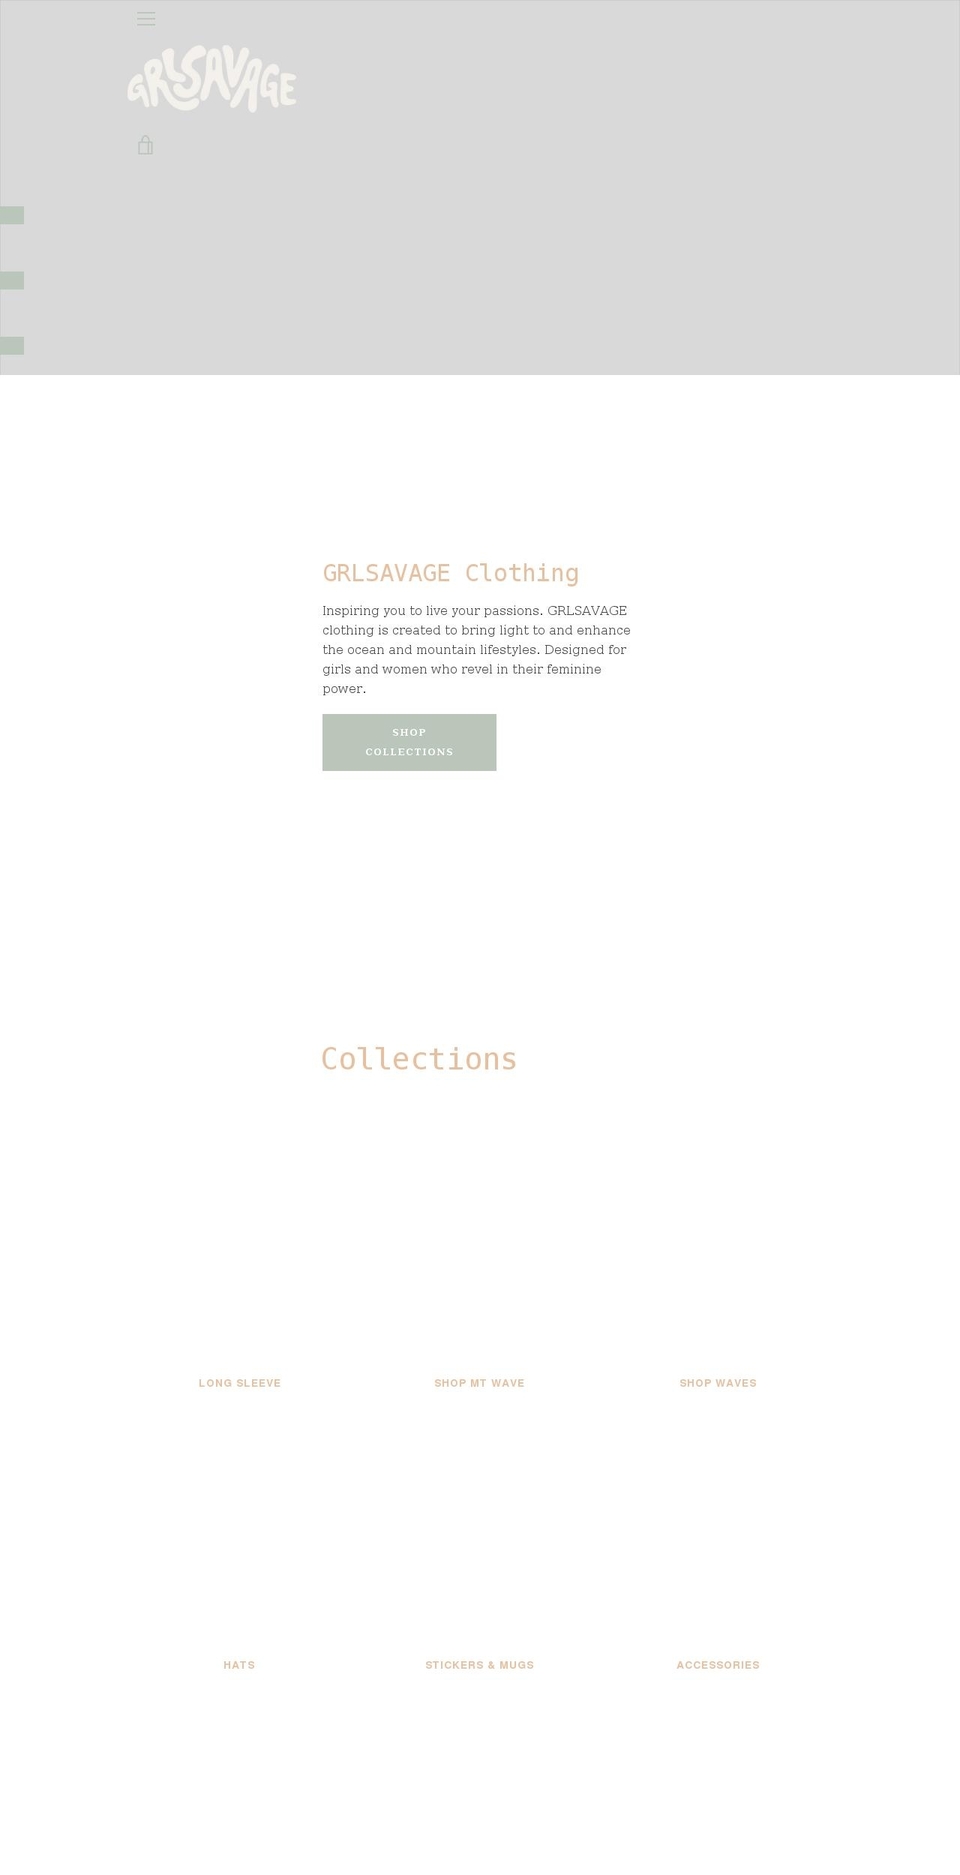 Narrative with Installments message Shopify theme site example grlsavage.com